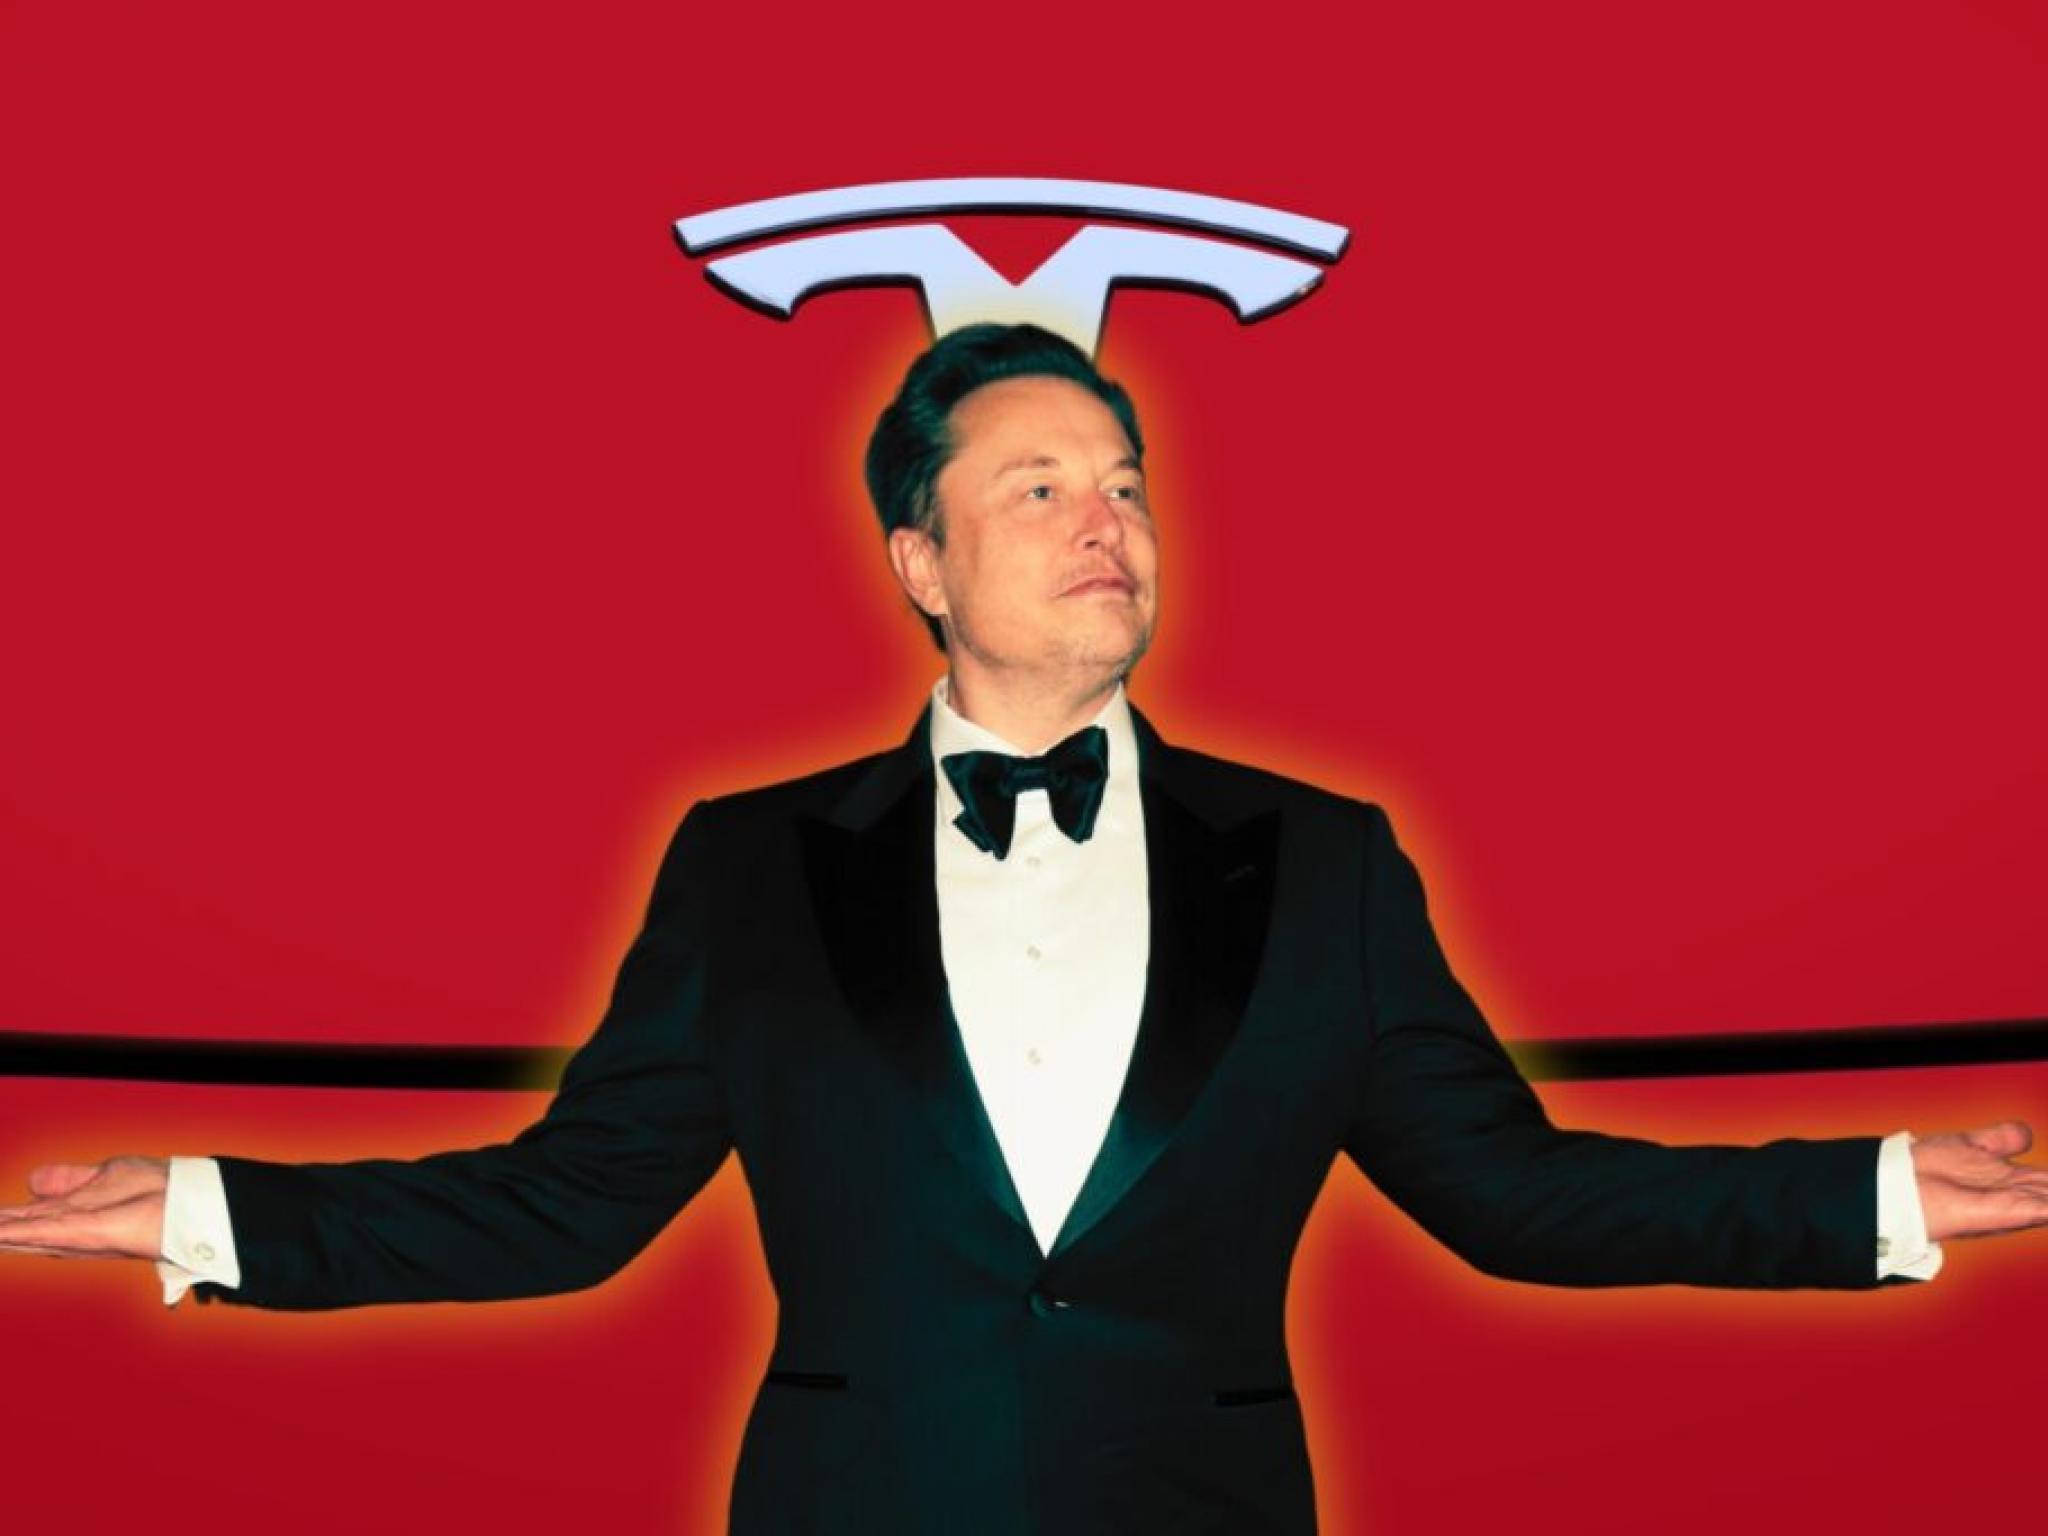  tesla-shareholder-coalition-urges-other-investors-to-reject-elon-musks-56b-pay-package-calls-for-adequately-focused-full-time-ceo 